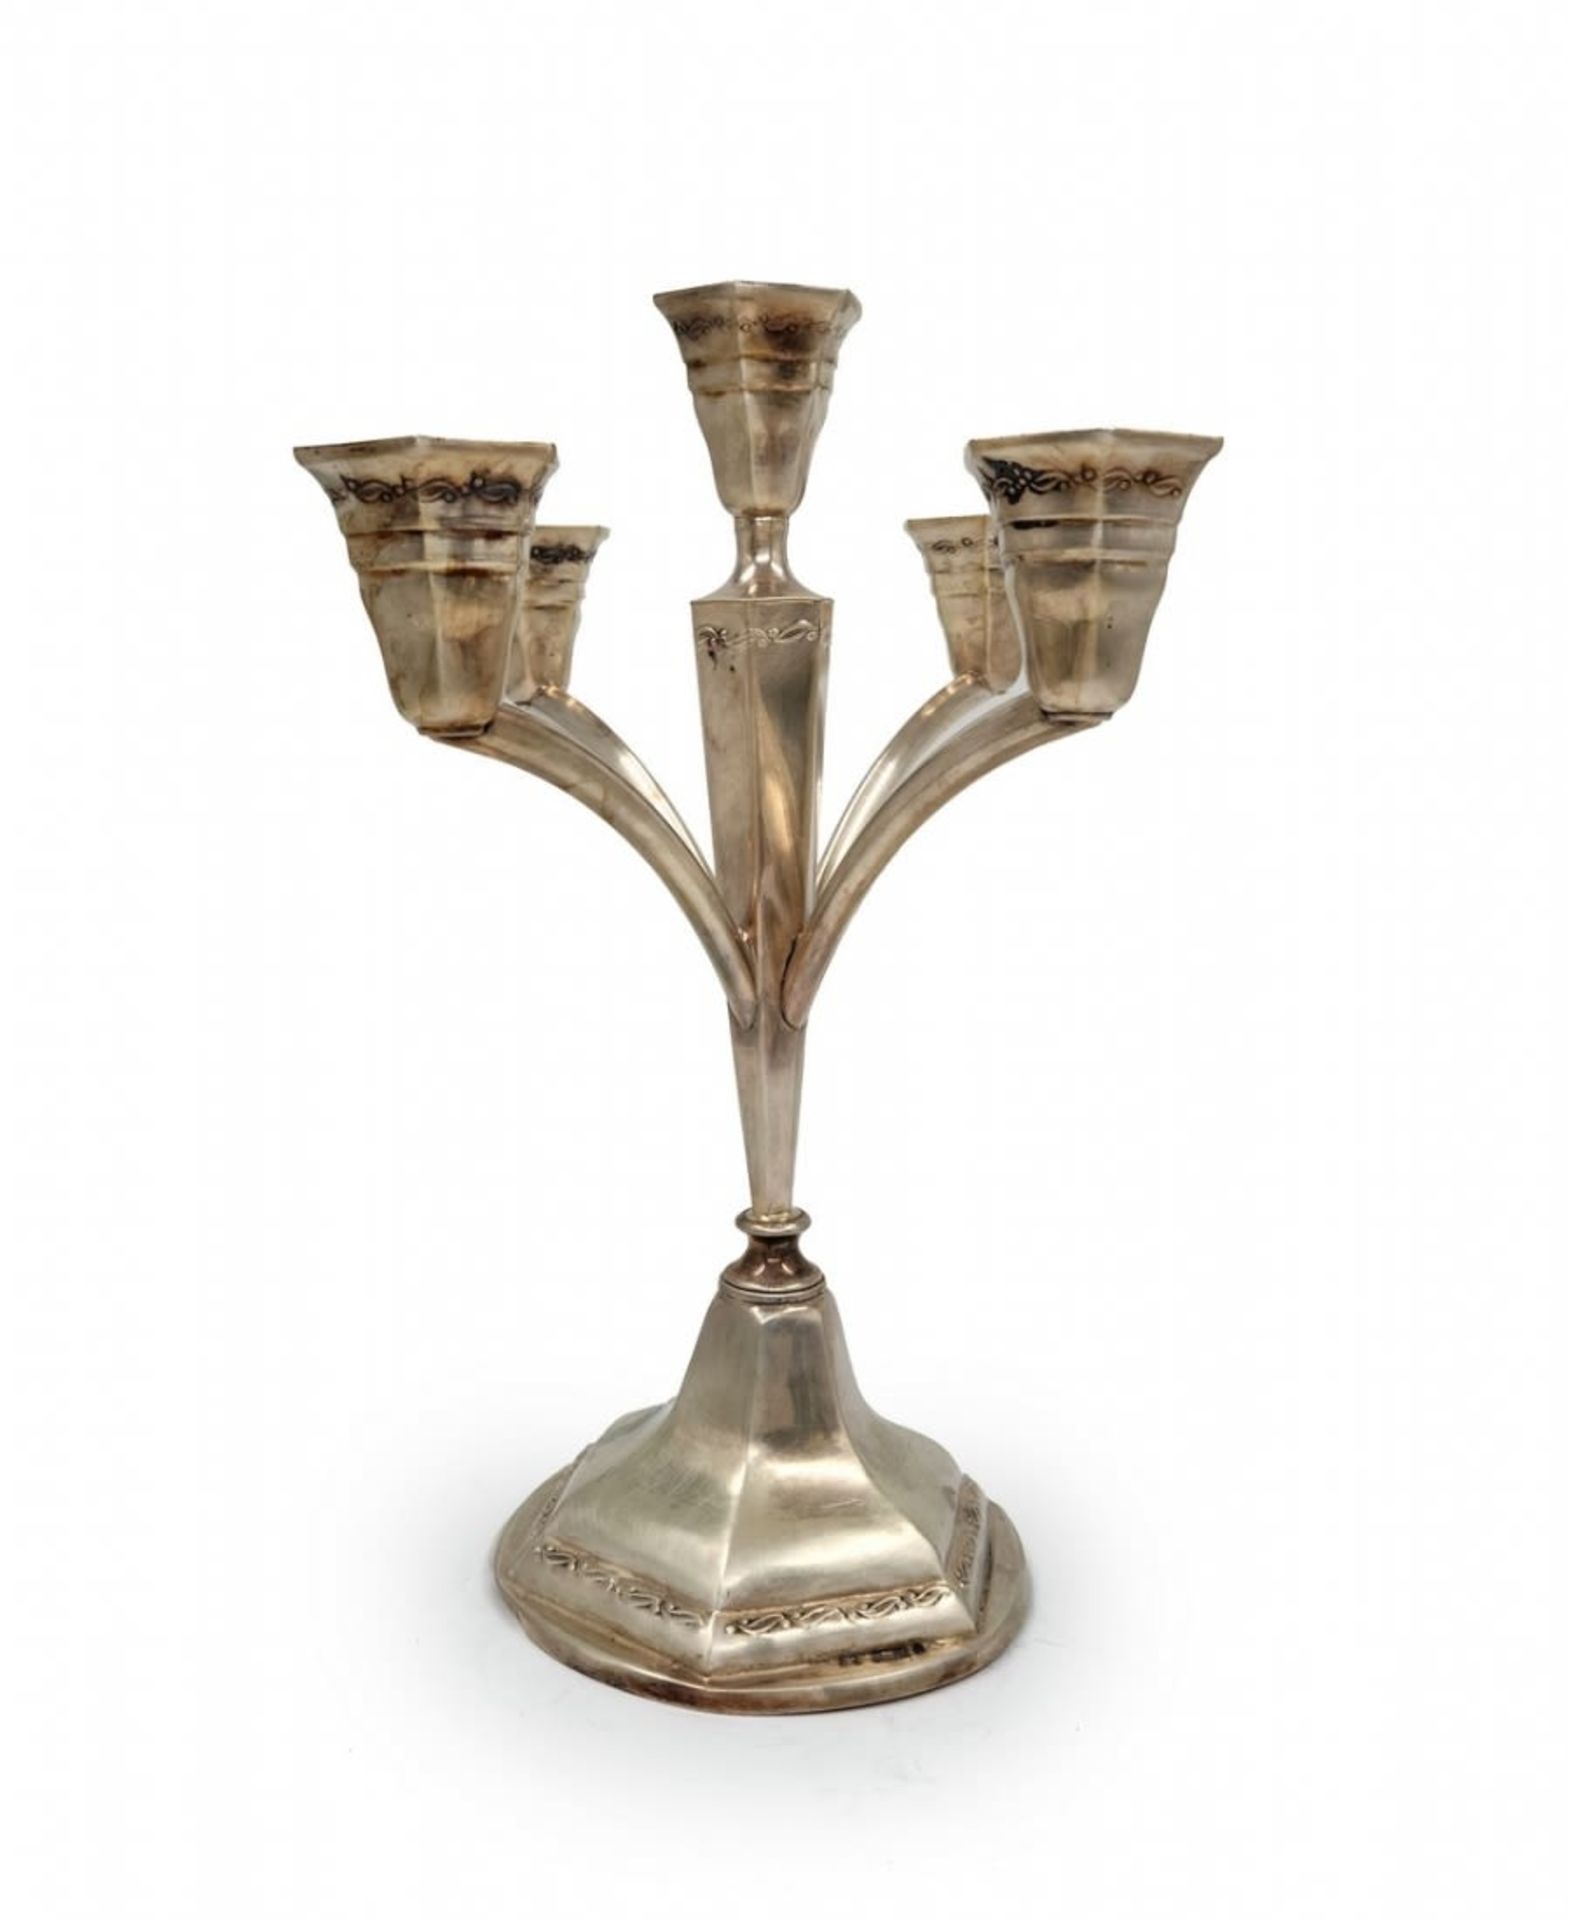 A silver candlestick for five candles, made by the 'Hazorifim' company, made of '800' silver, - Image 3 of 8